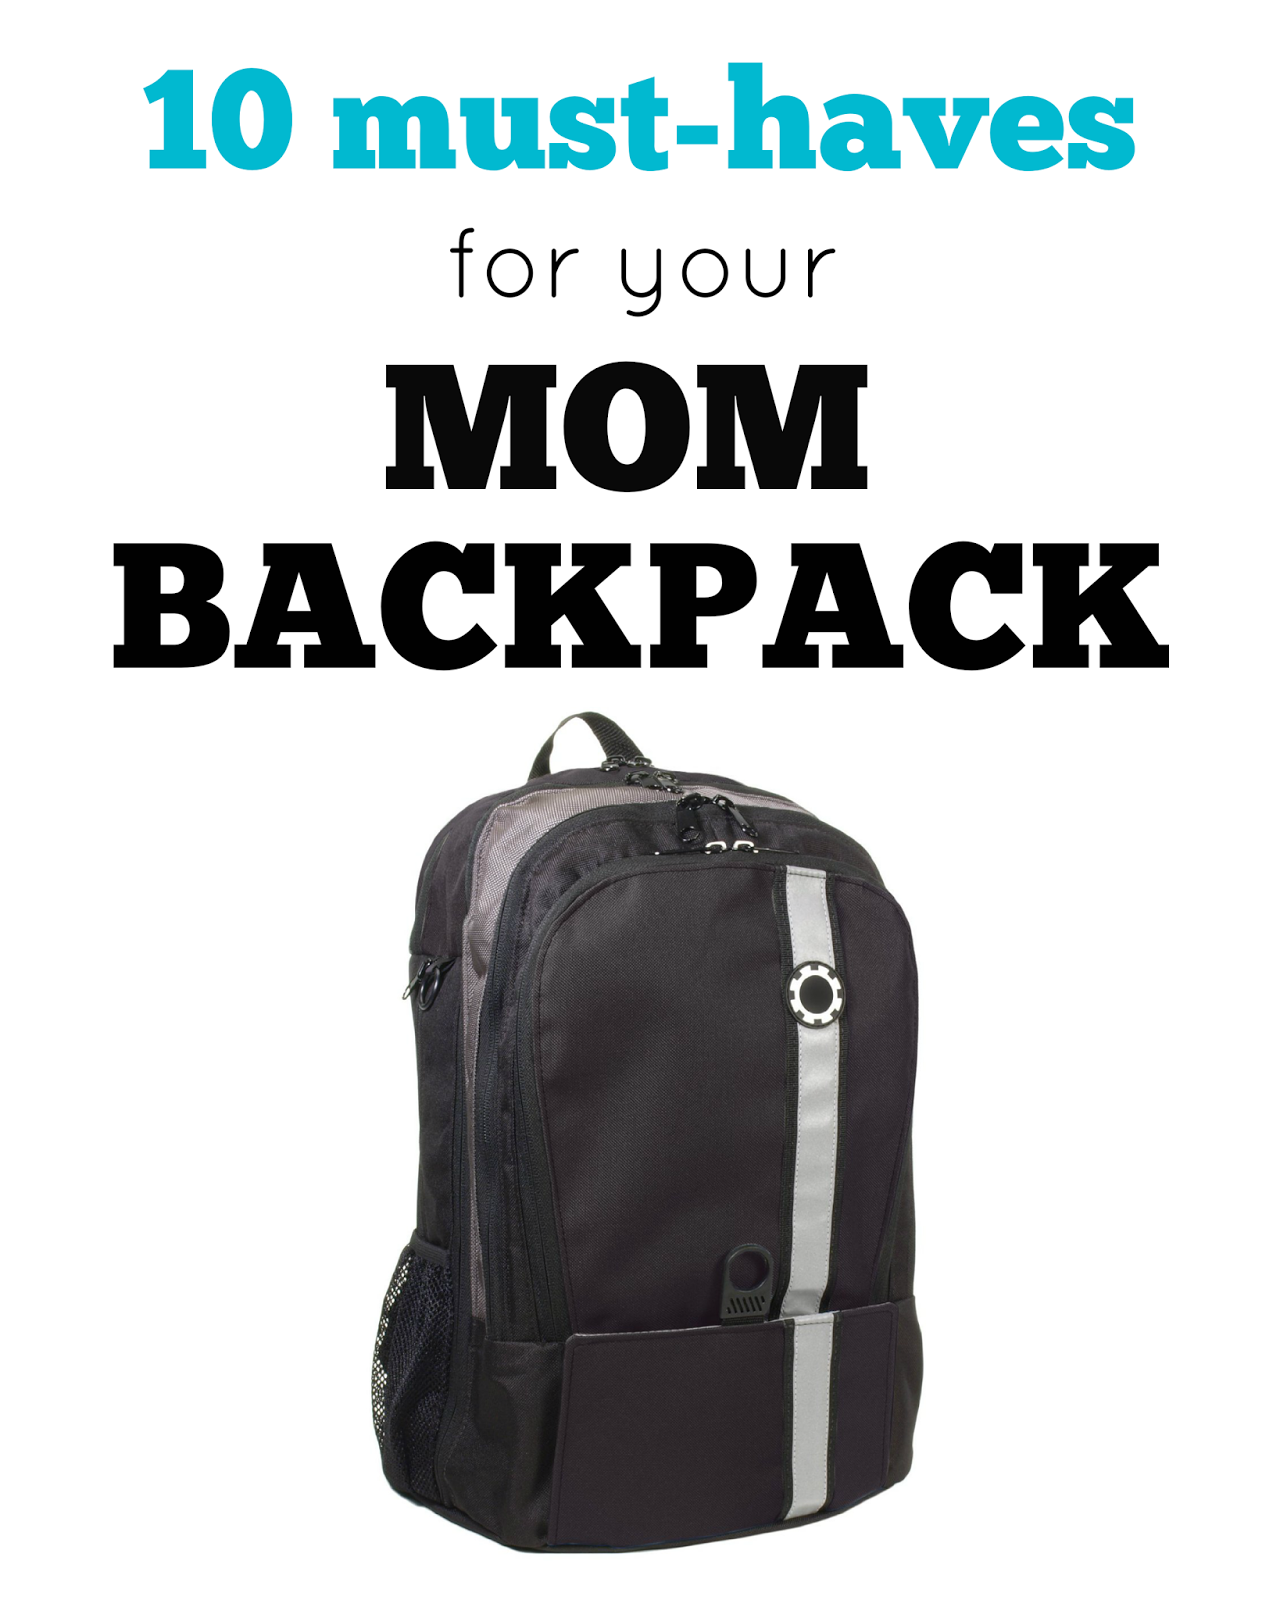 Toddler Approved!: 10 Must-haves For Your Mom Backpack